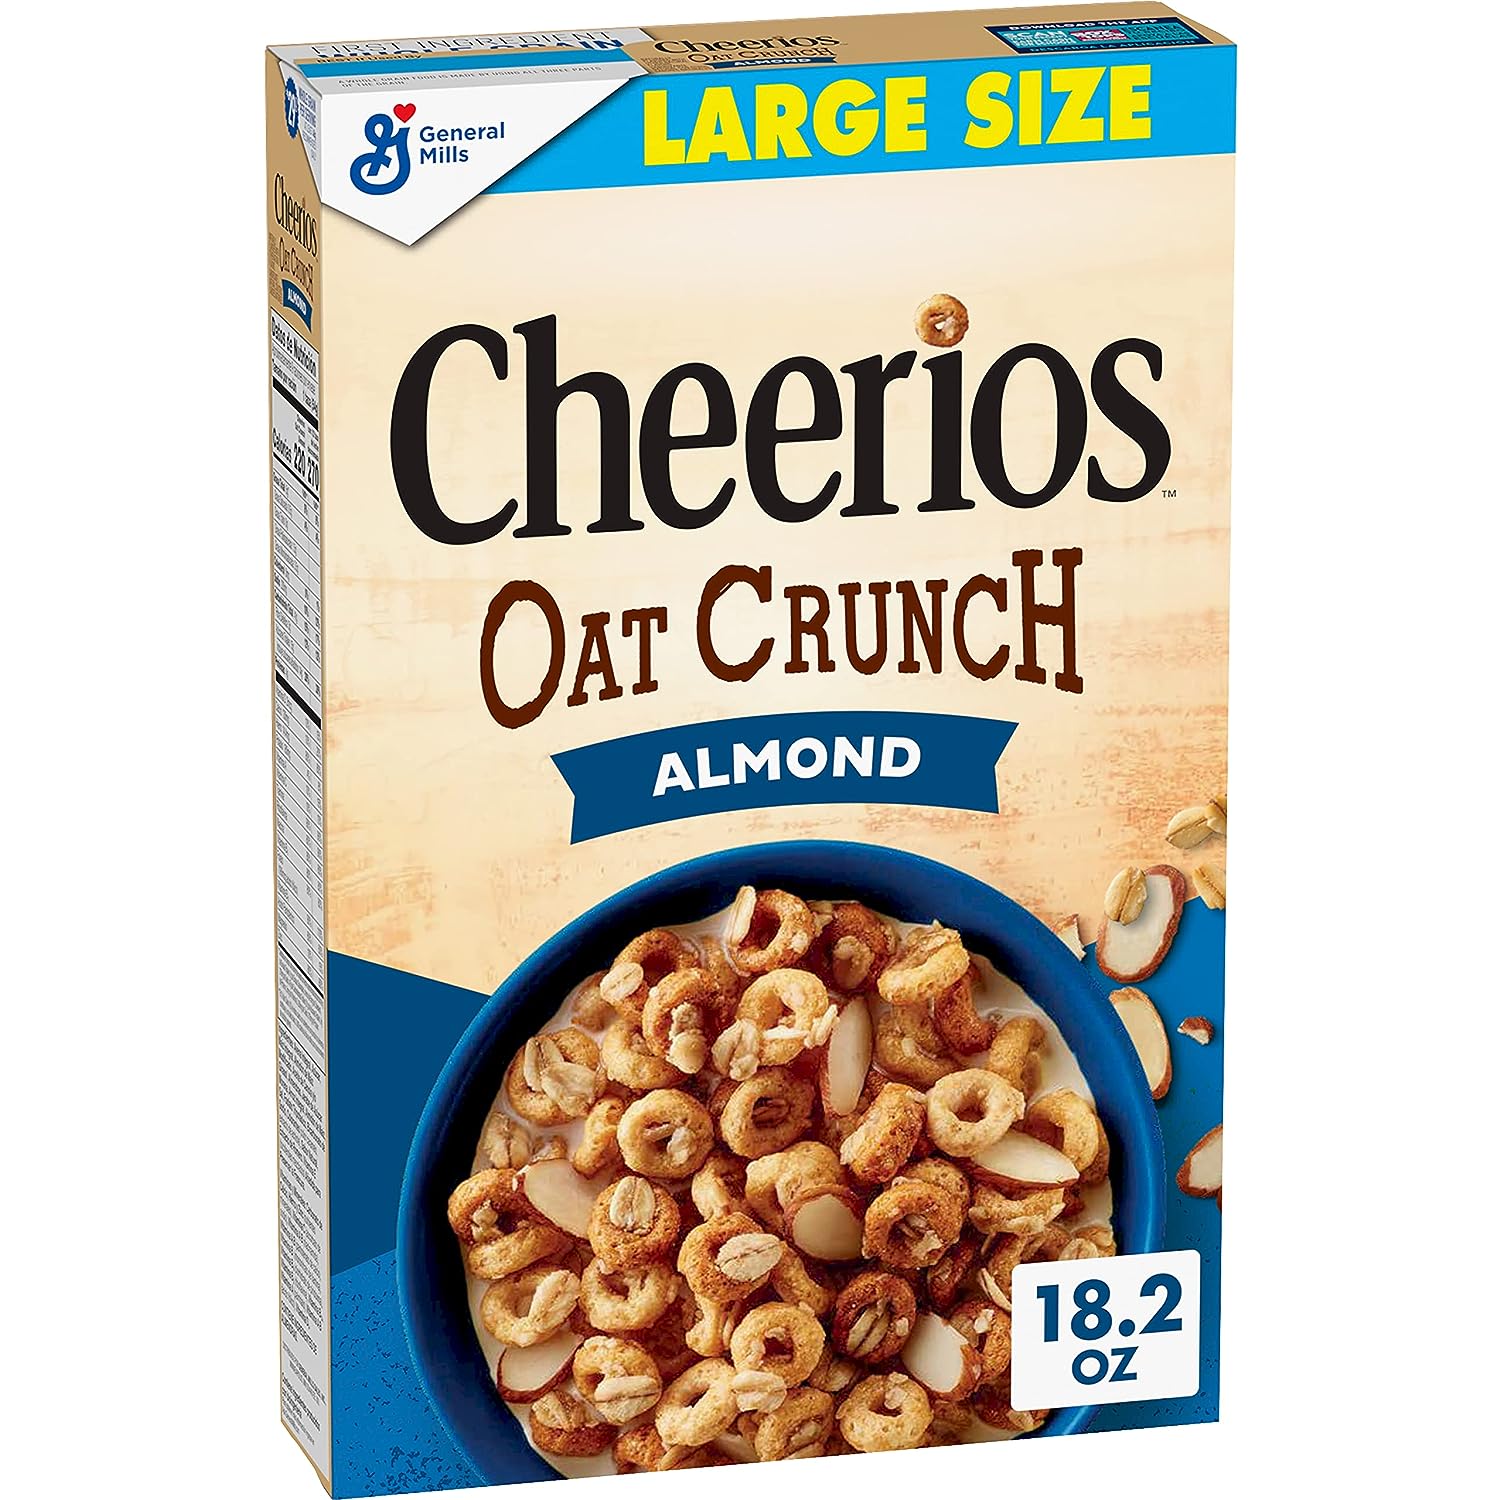 Cheerios Oat Crunch Almond Oat Breakfast Cereal, Large Size, 18.2 oz